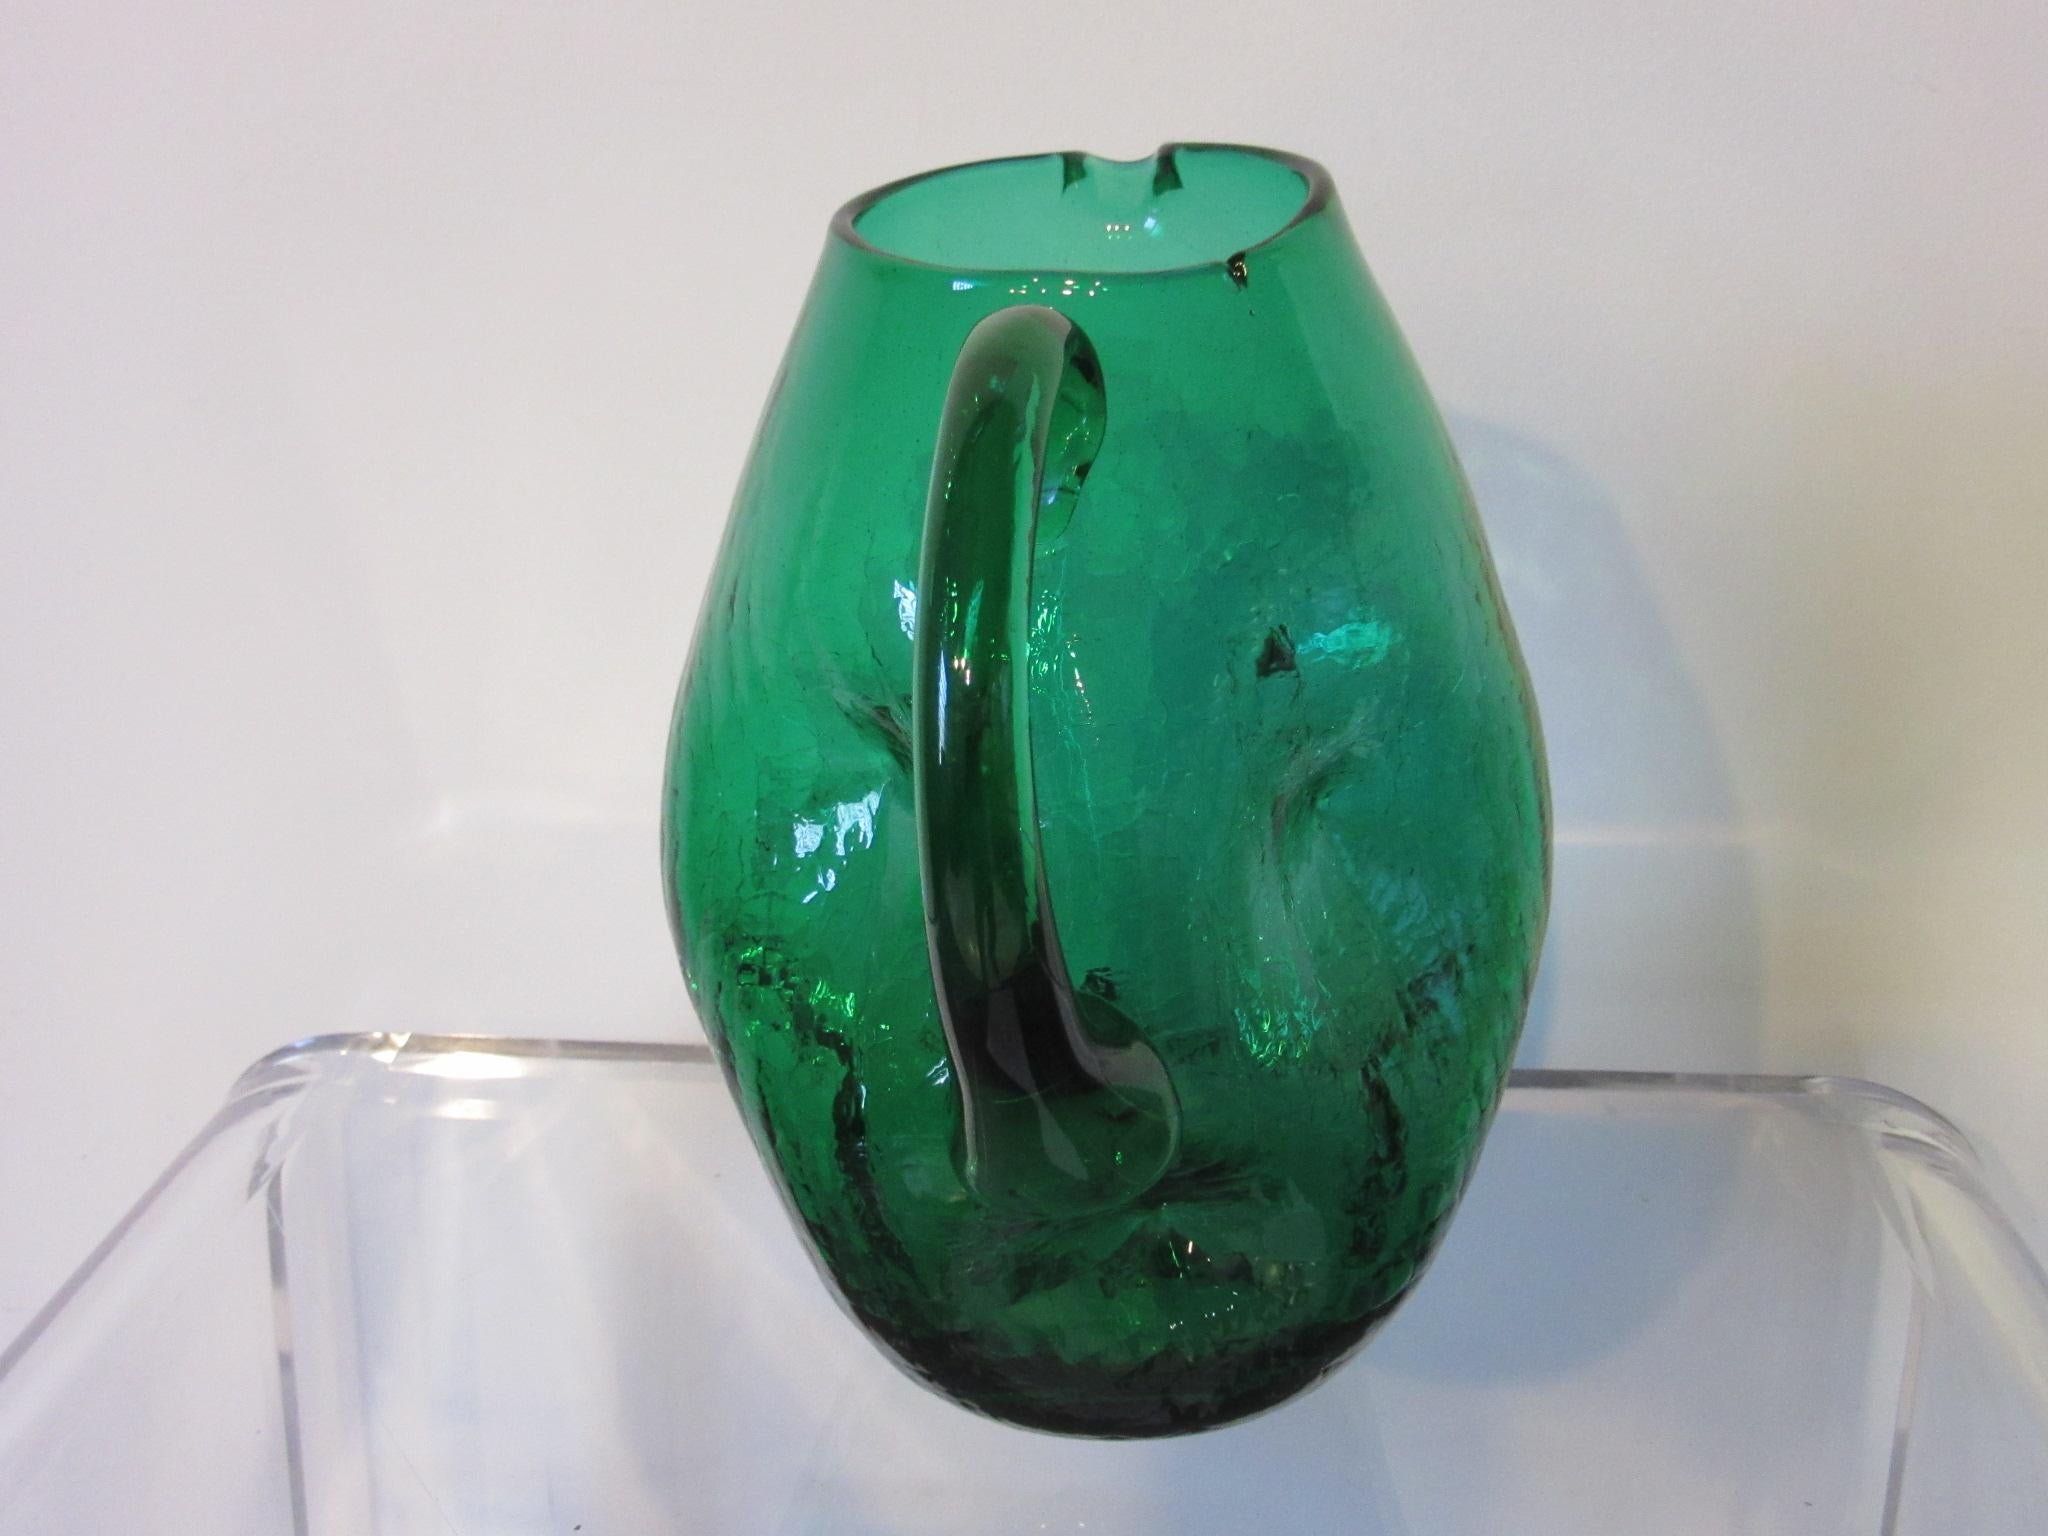 A sculptural crackle pitcher vase with dented design handcrafted by Winslow Anderson for the Blenko Glass Company .